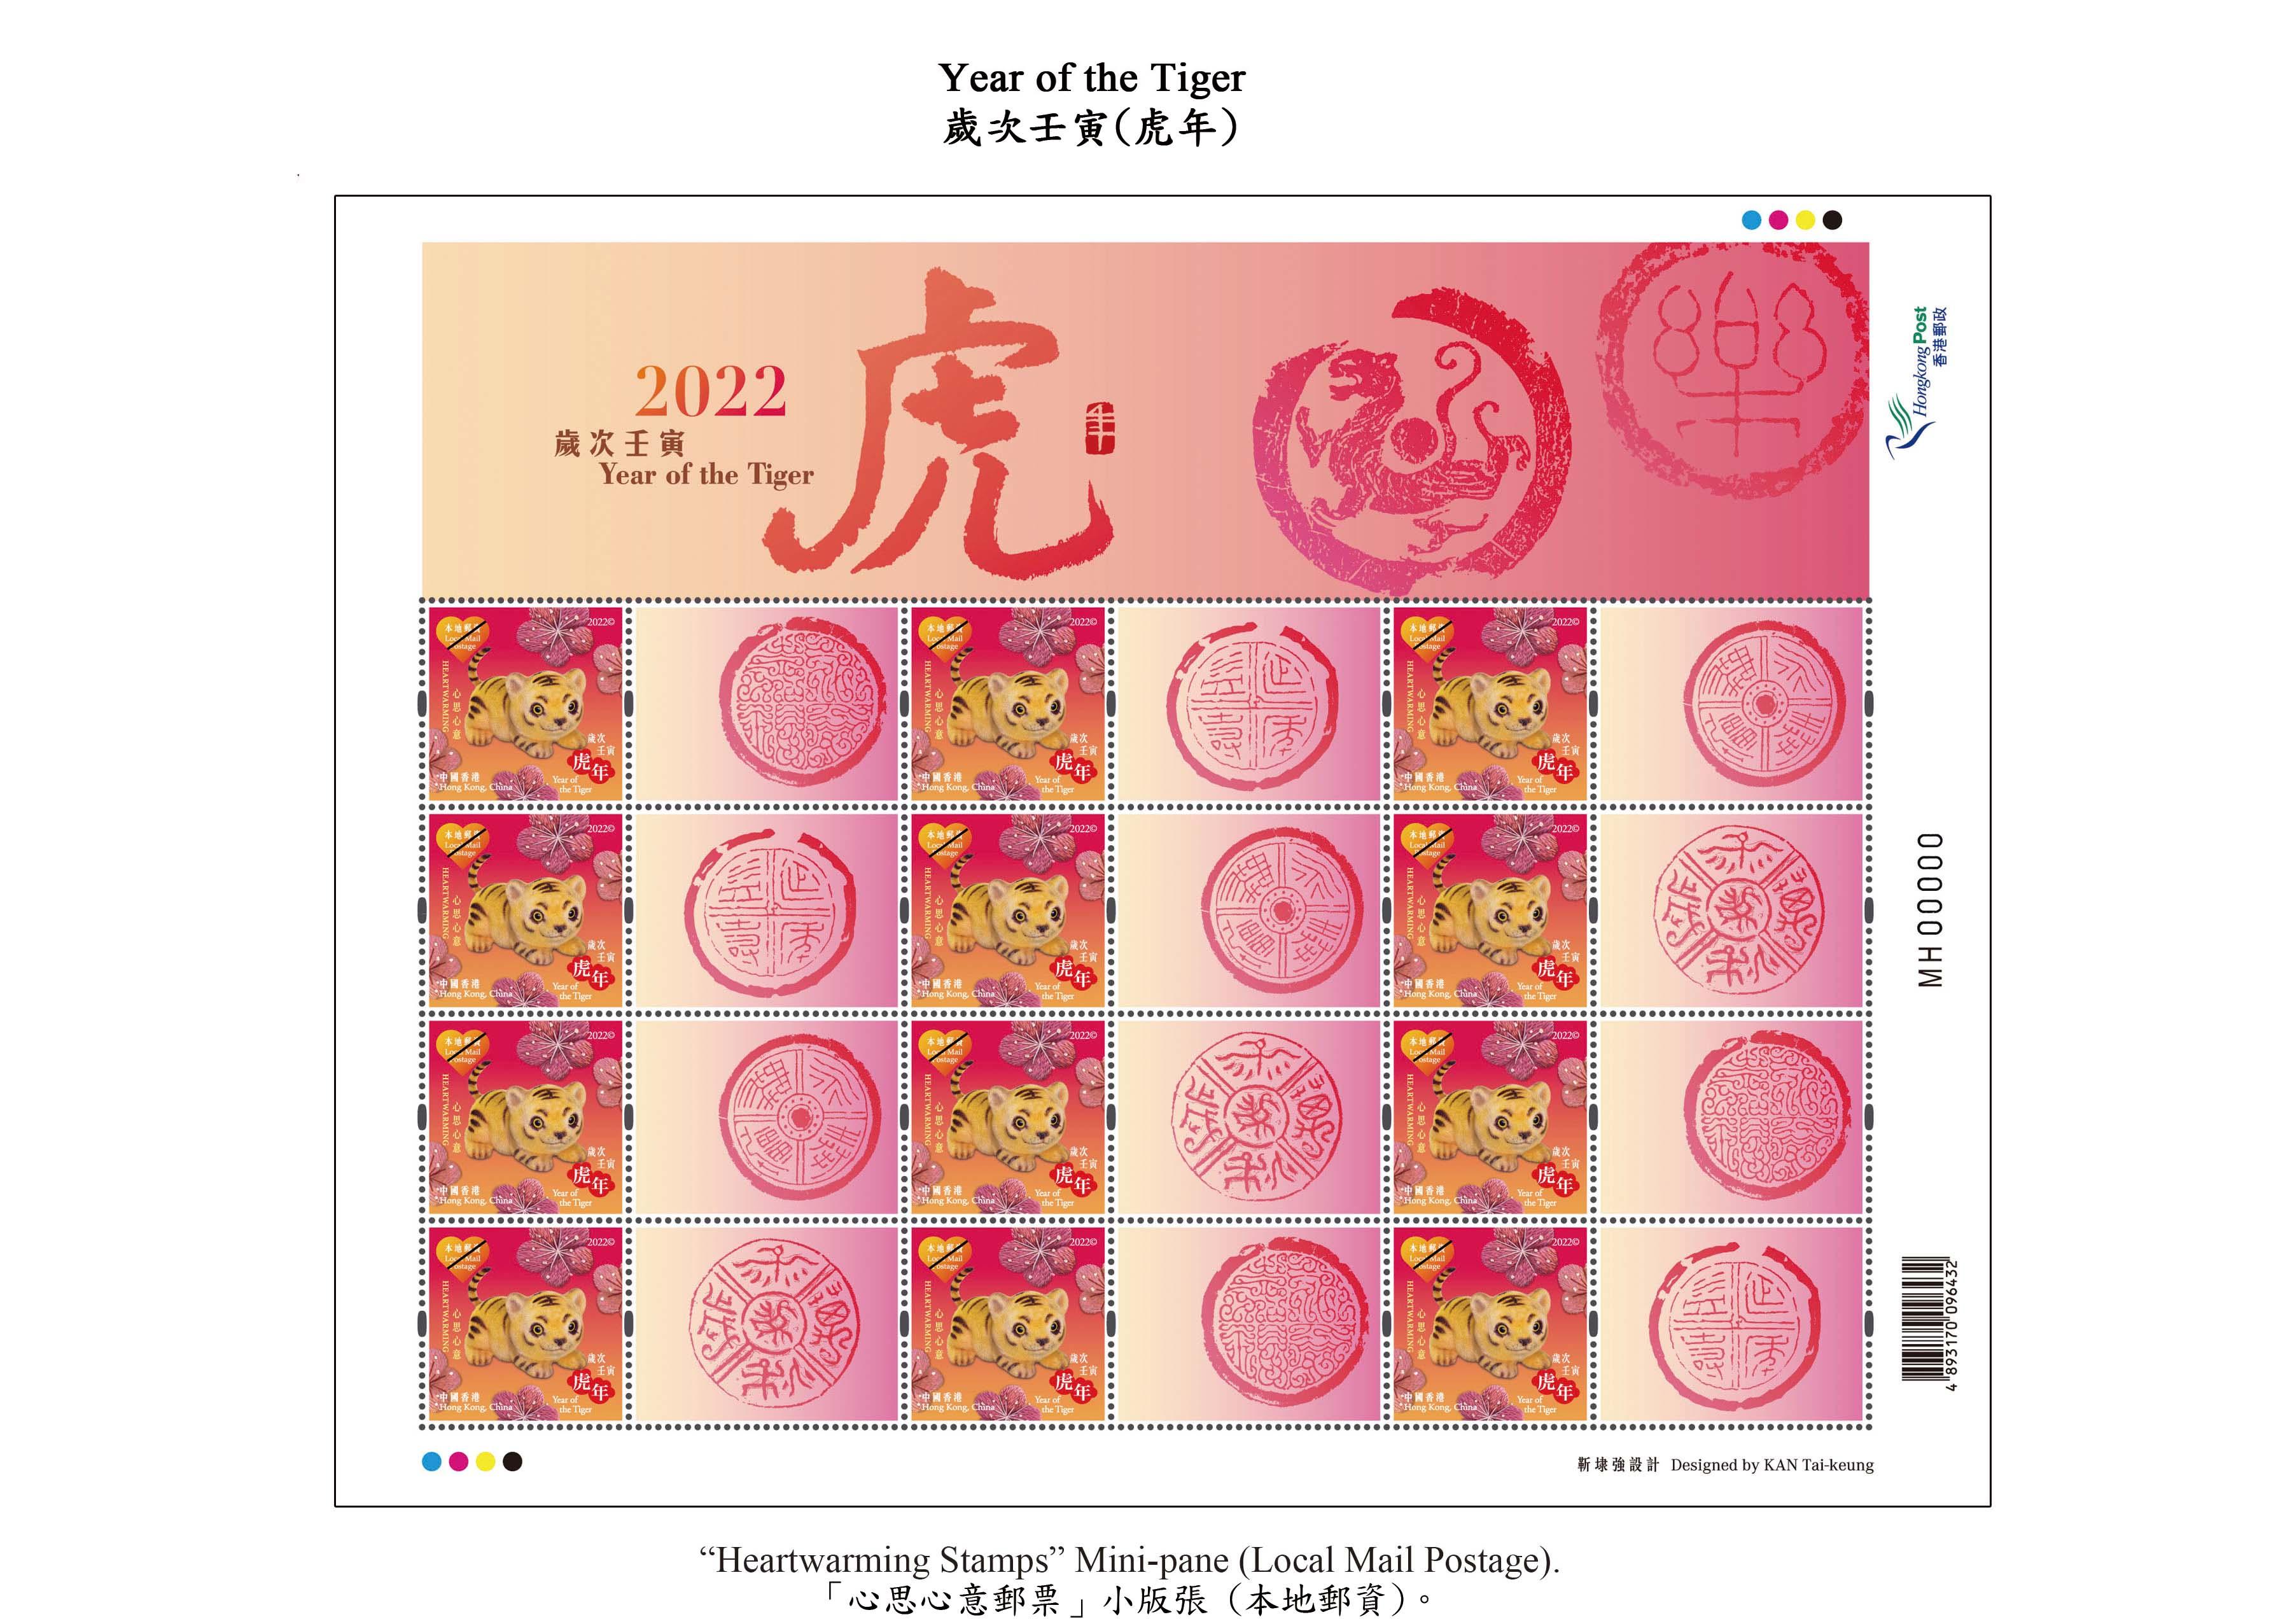 Hongkong Post will launch a special stamp issue and associated philatelic products with the theme "Year of the Tiger" on January 18 (Tuesday). Photo shows the "Heartwarming Stamps" mini-pane (local mail postage).
